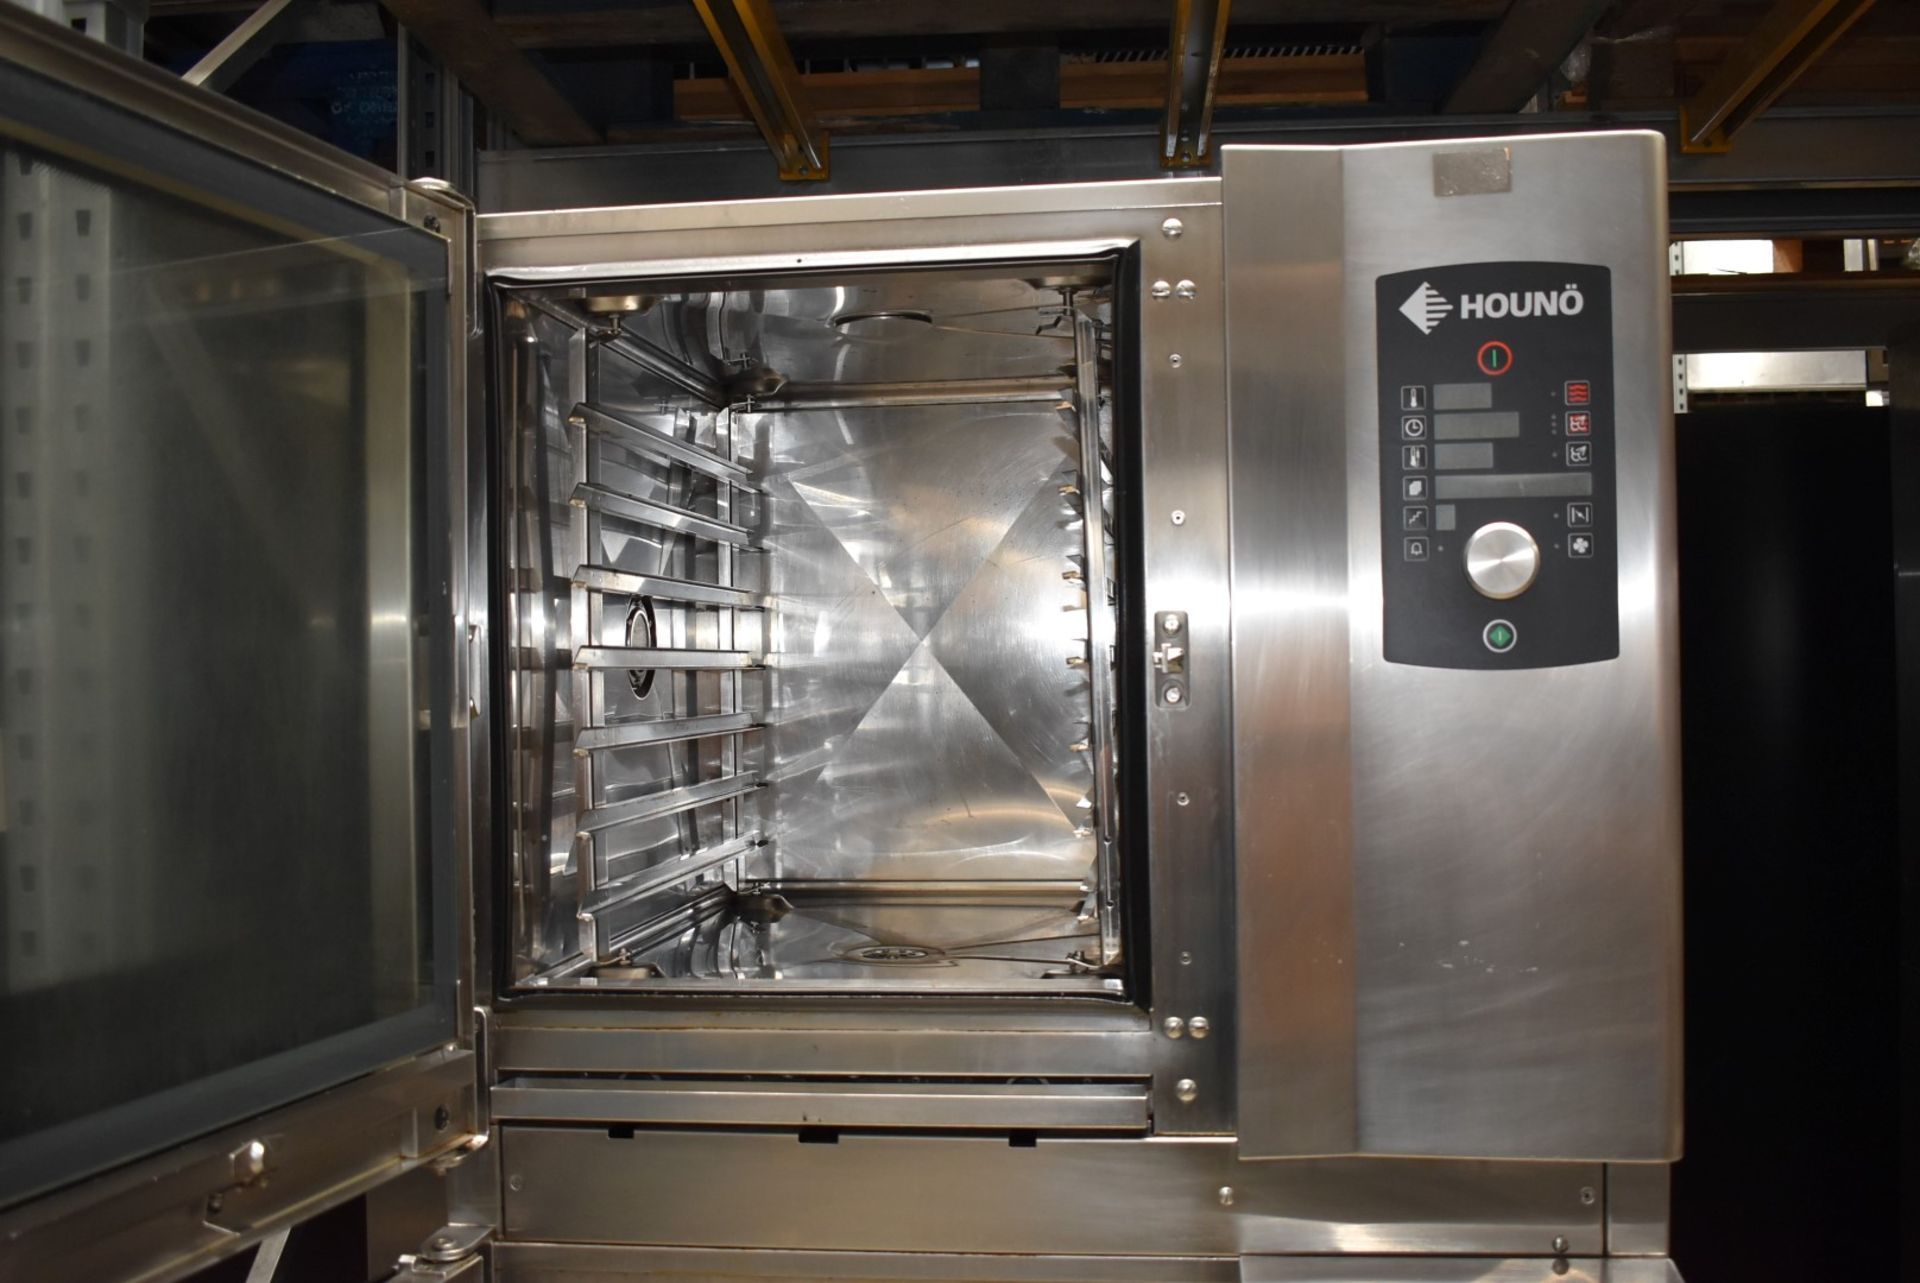 1 x Houno Double 6 Grid Stacked Combi Oven - Model: C 1.06 / CPE 1.06 - 3 Phase - Image 16 of 21